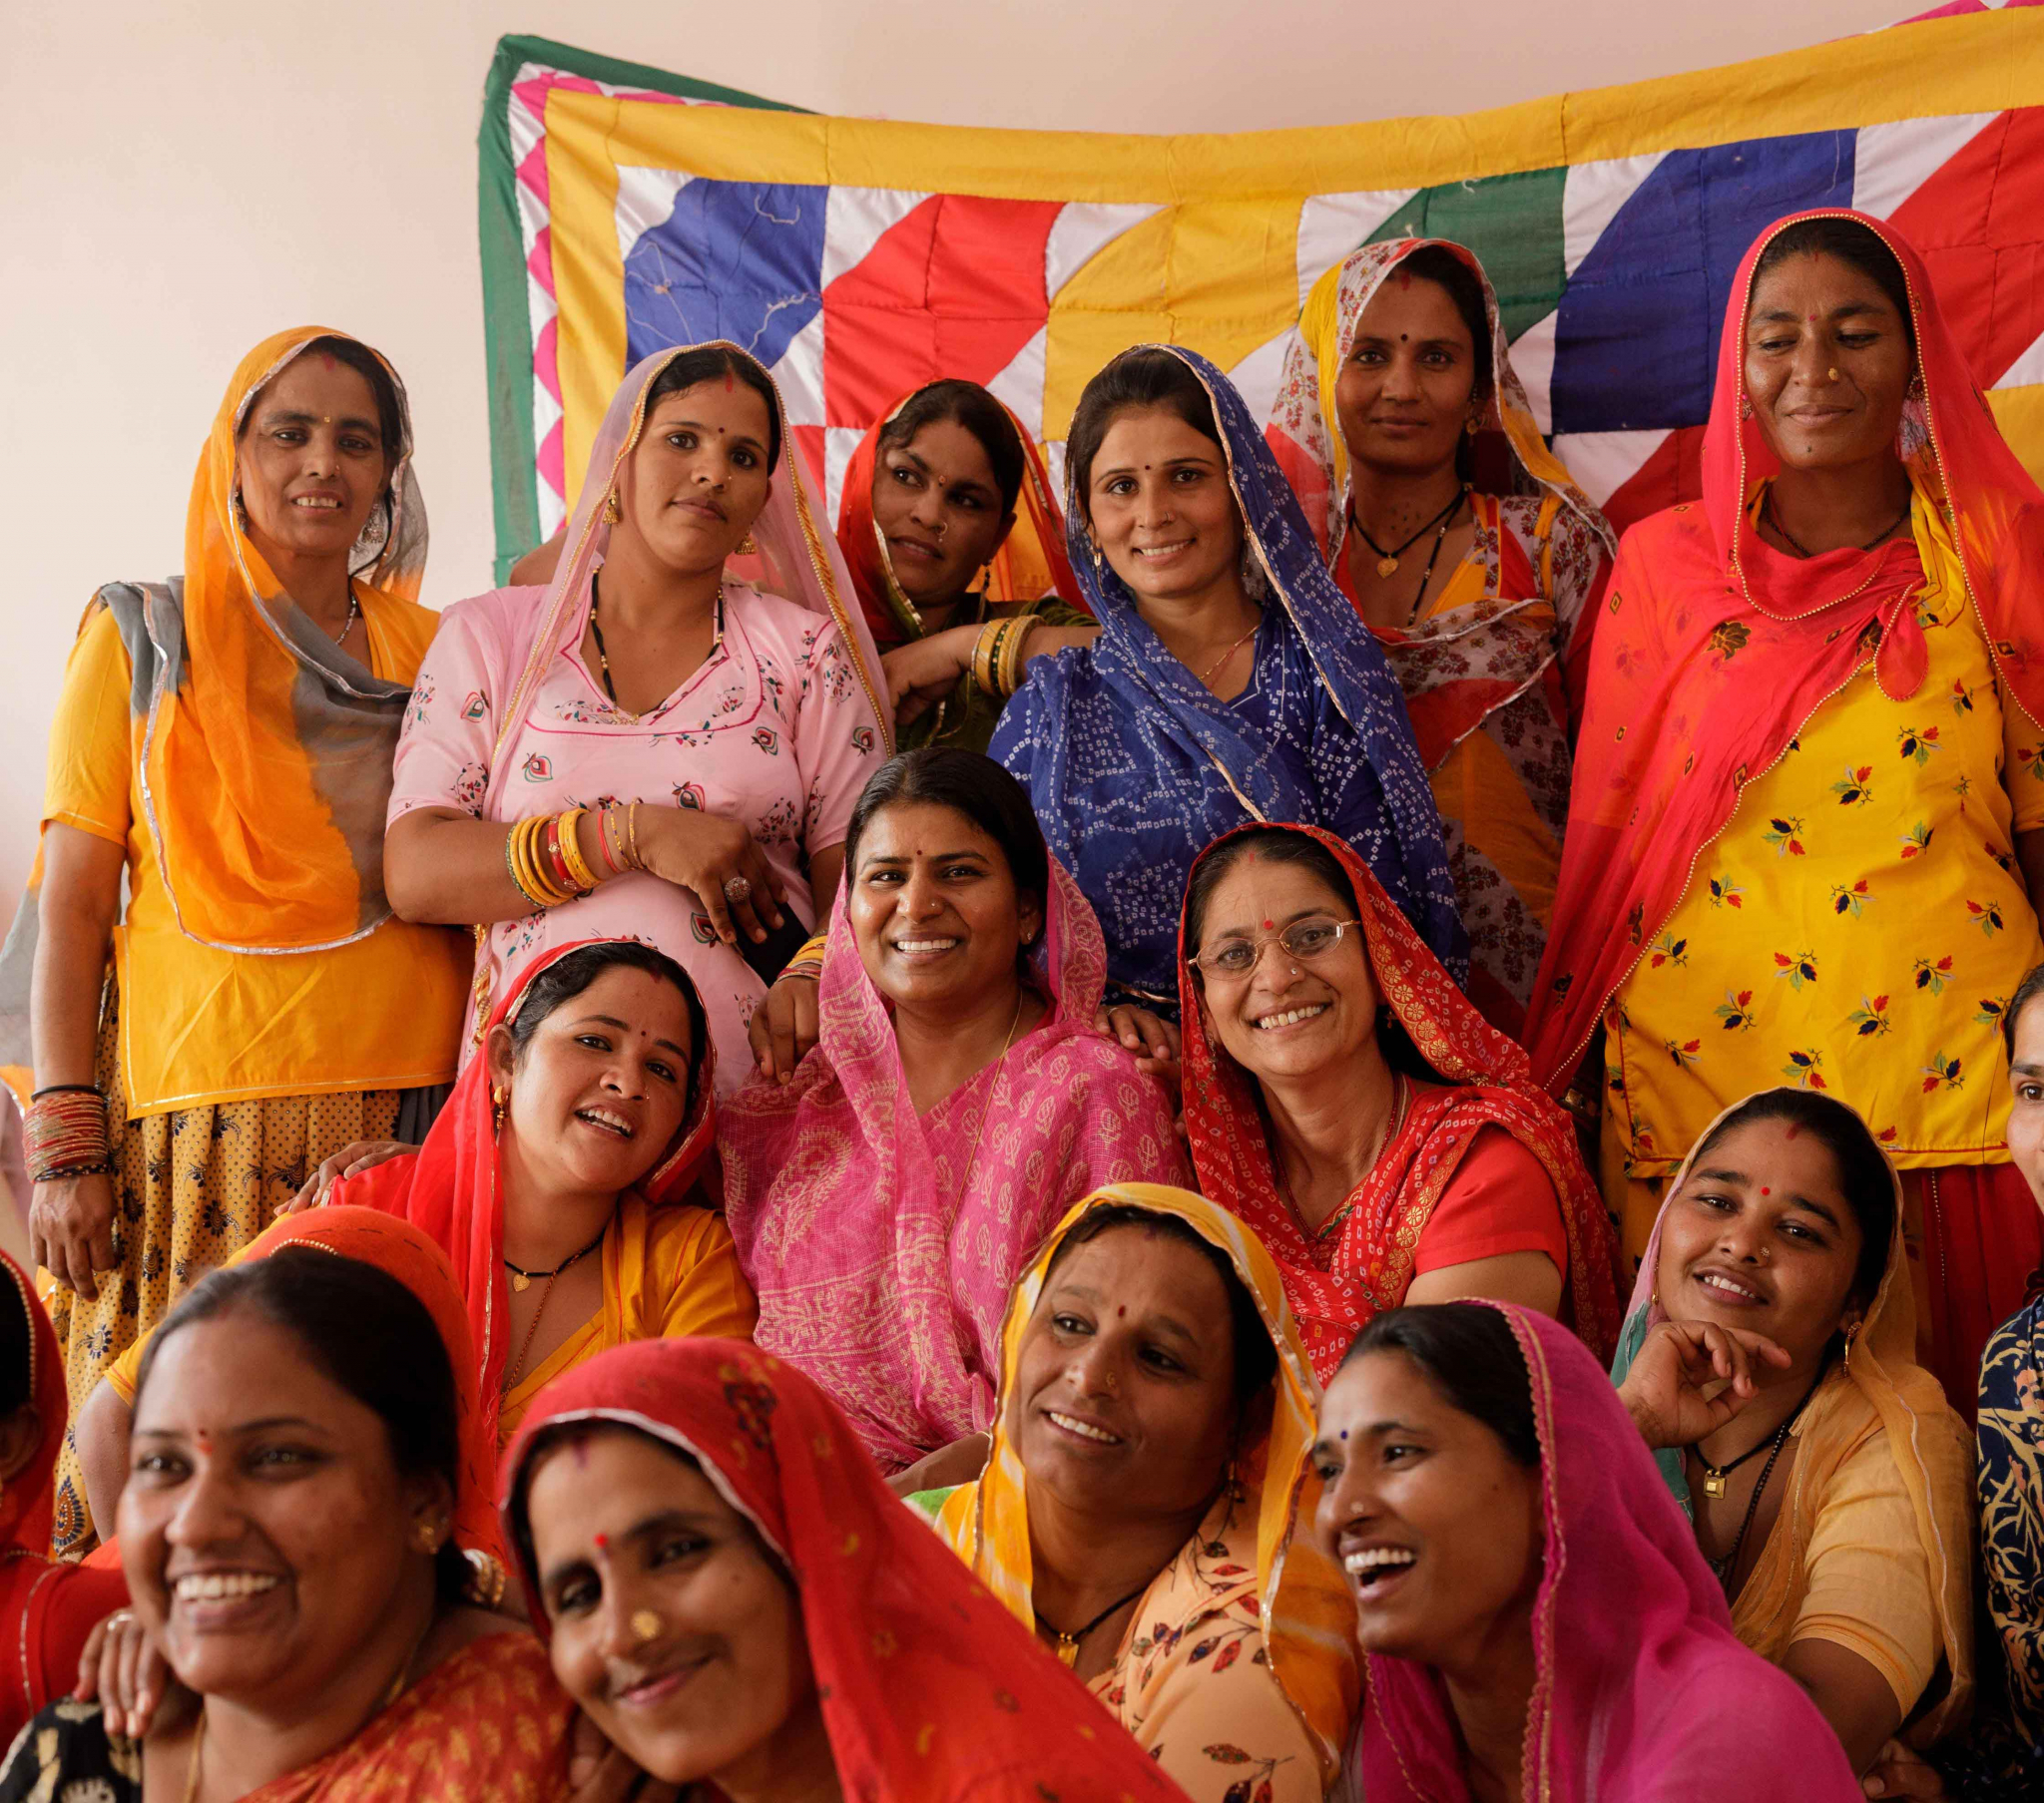 "Empowered women artisans from Saheli Women Organization sharing joy and laughter, united in their creativity and strength."